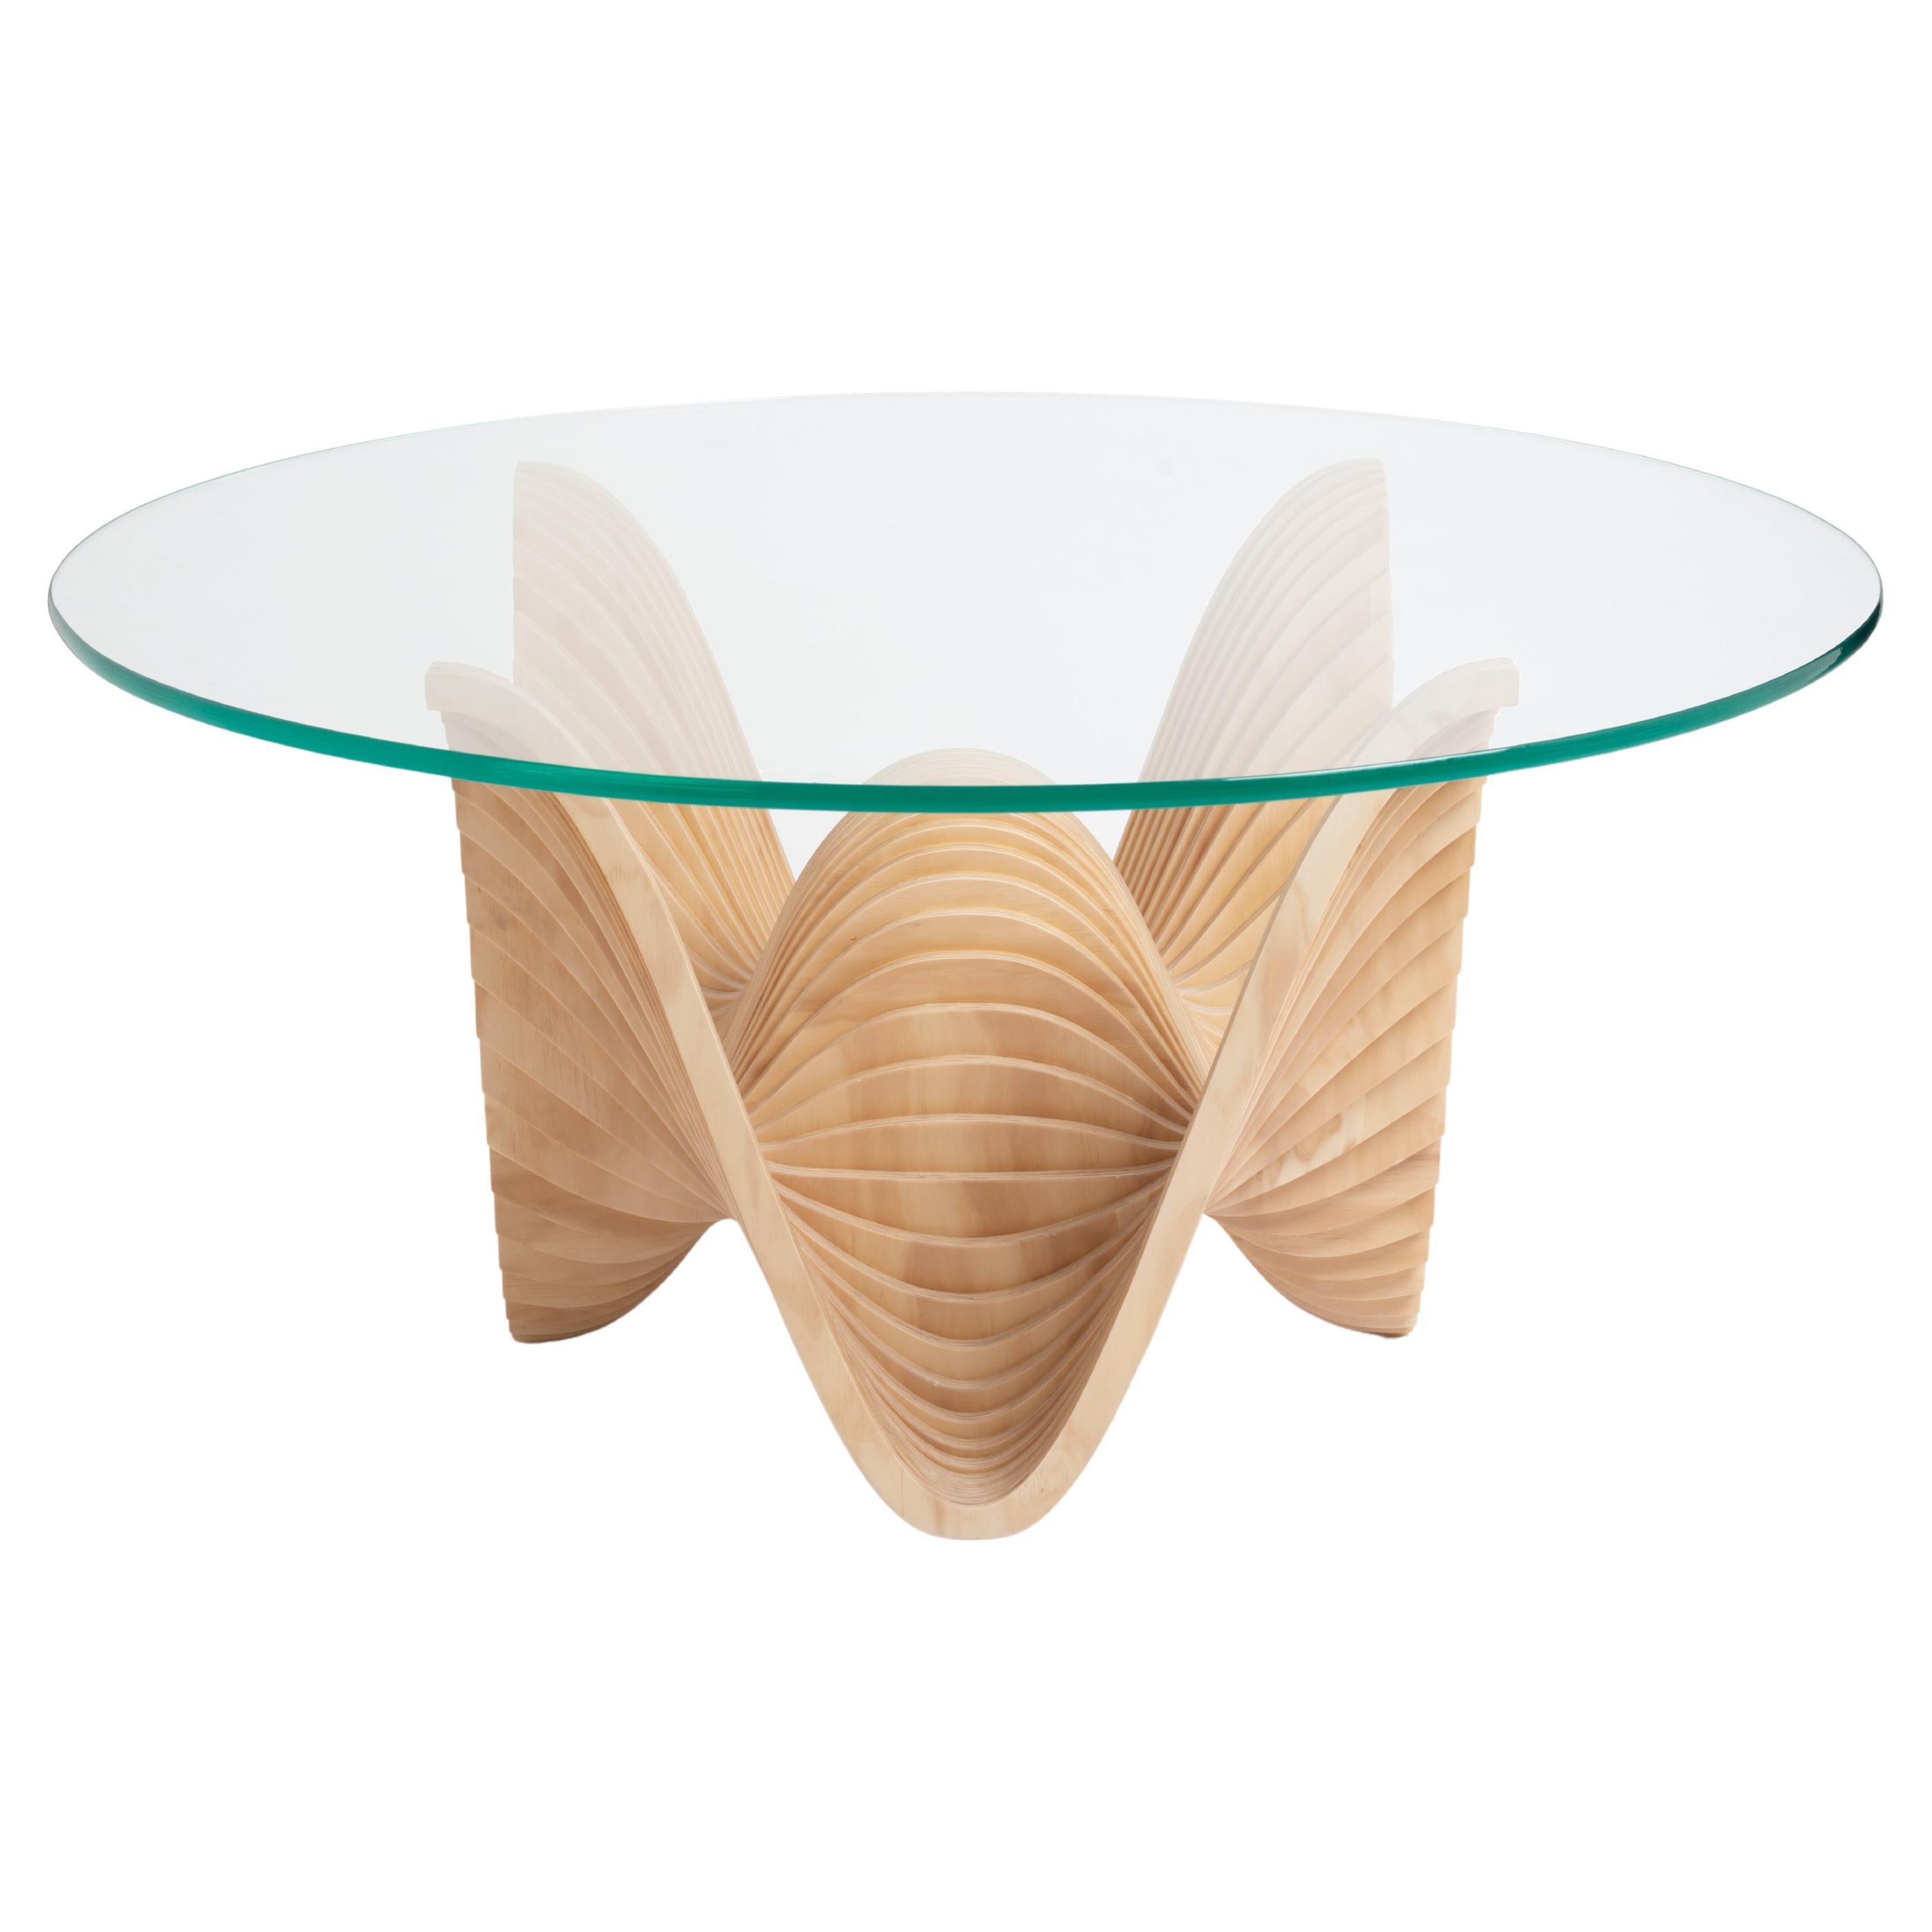 Candy Dining Table Medium by Piegatto, a Sculptural Contemporary Table For Sale